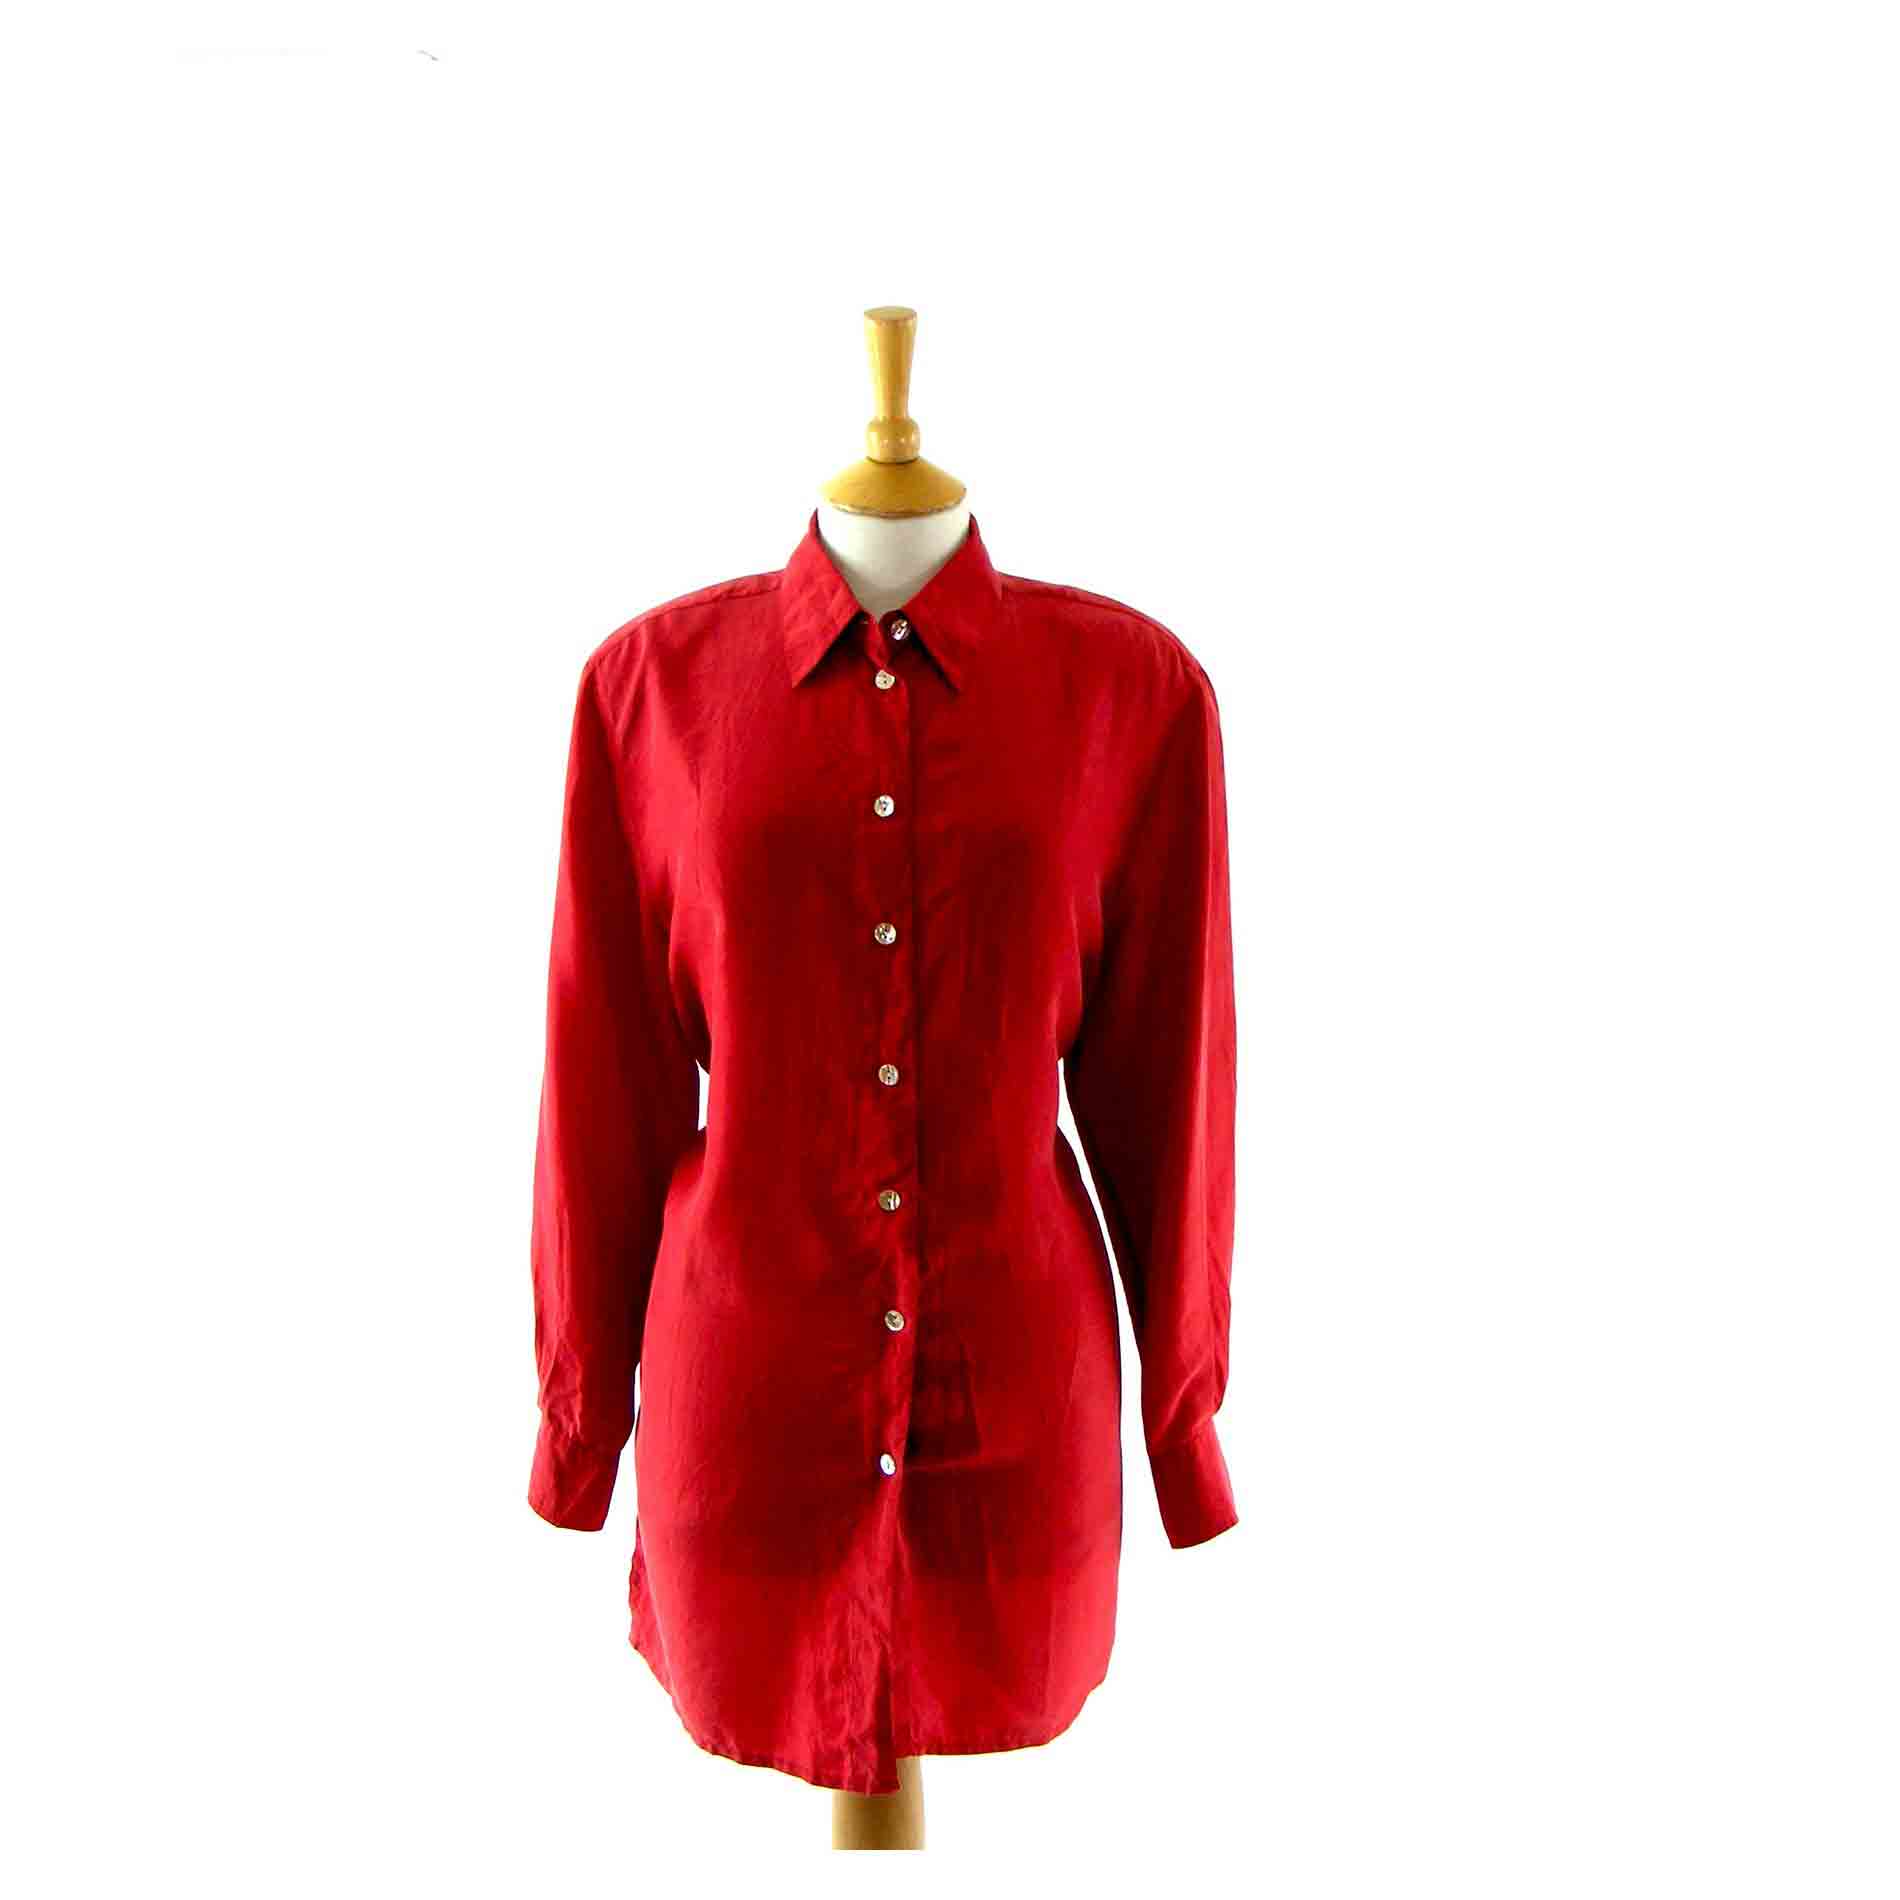 Cherry Red silk blouse - Blue 17 Vintage Clothing